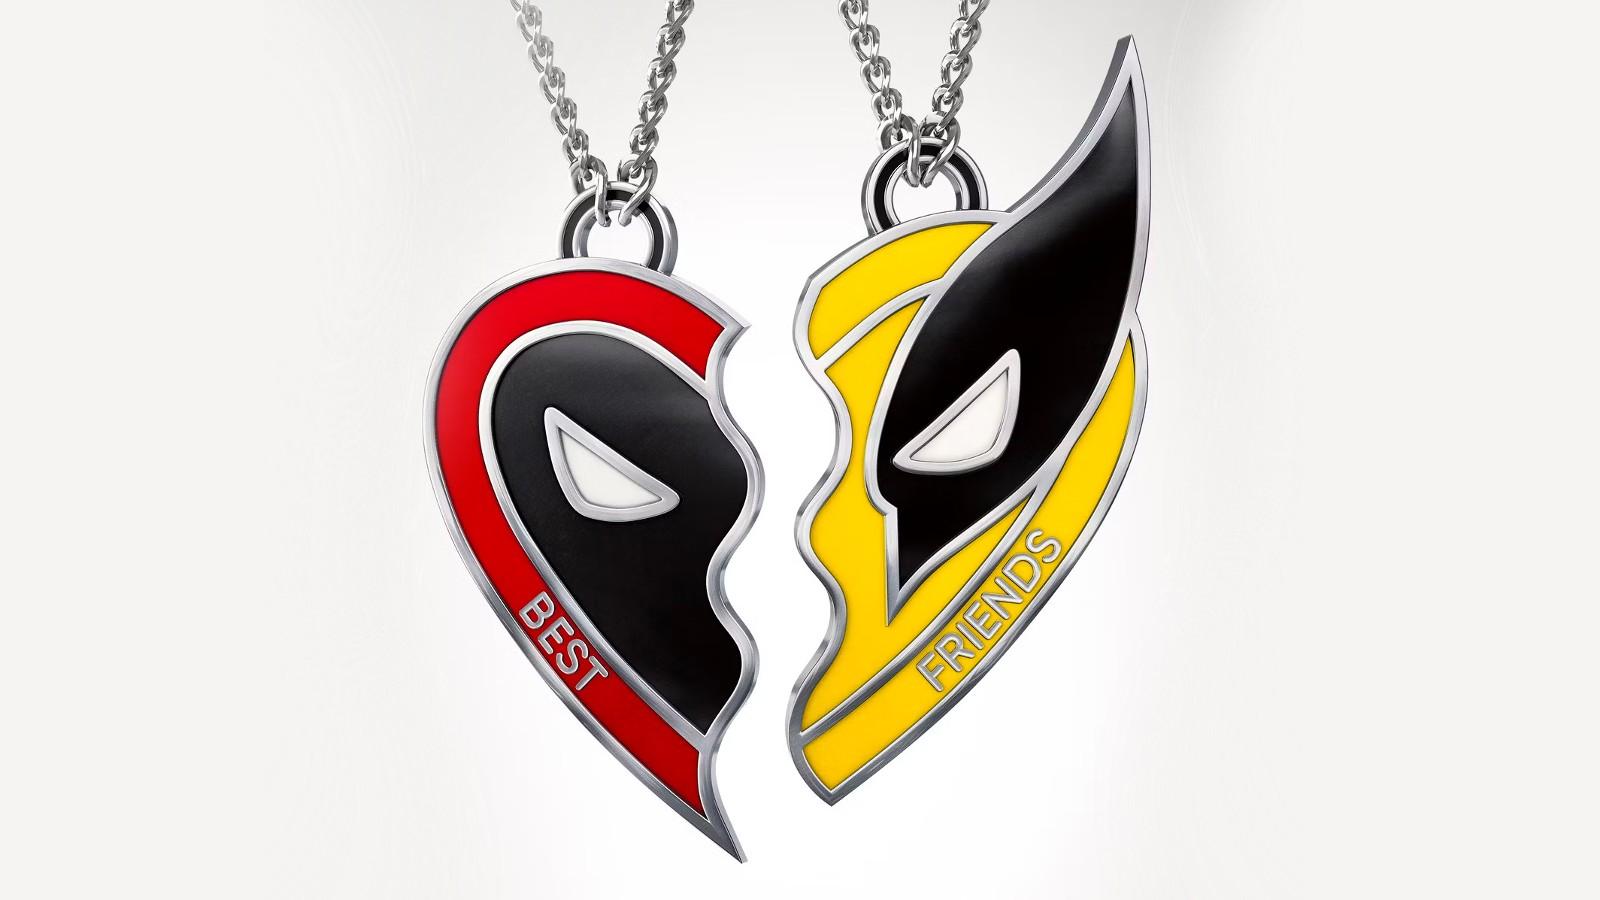 The best friends necklace from Deadpool & Wolverine